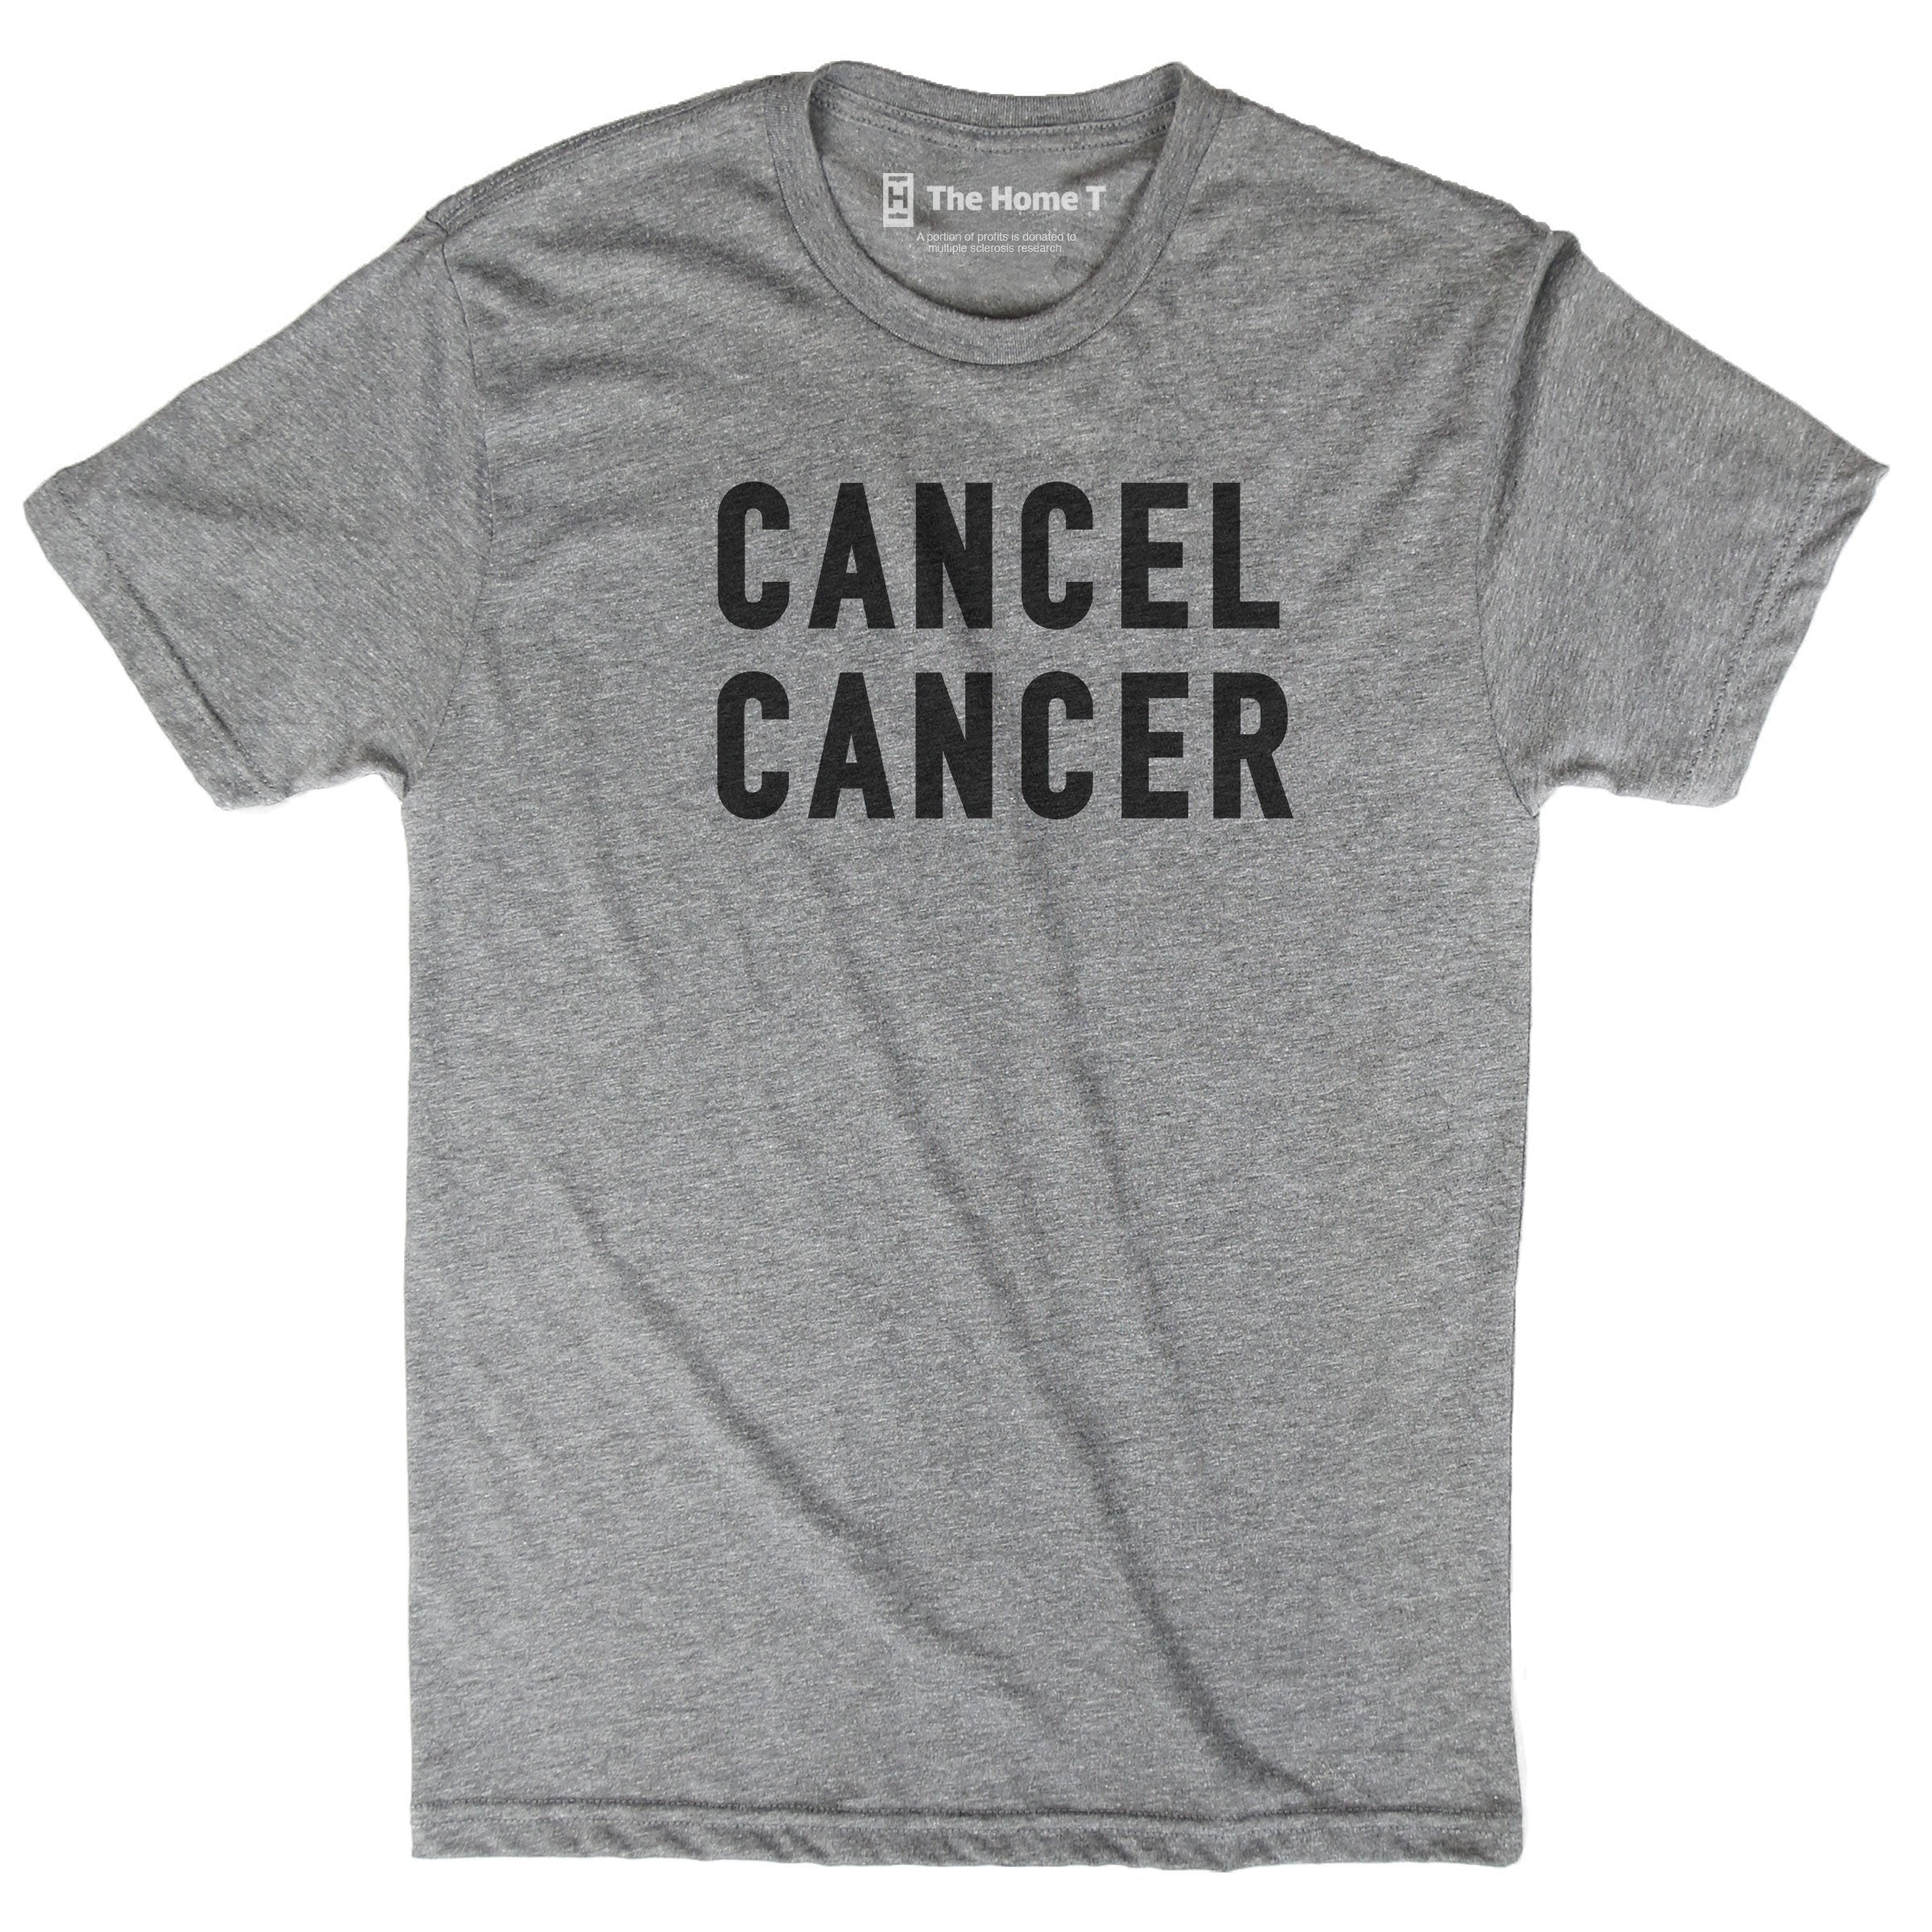 Cancel Cancer The Home T XS Crew Neck Athletic Grey